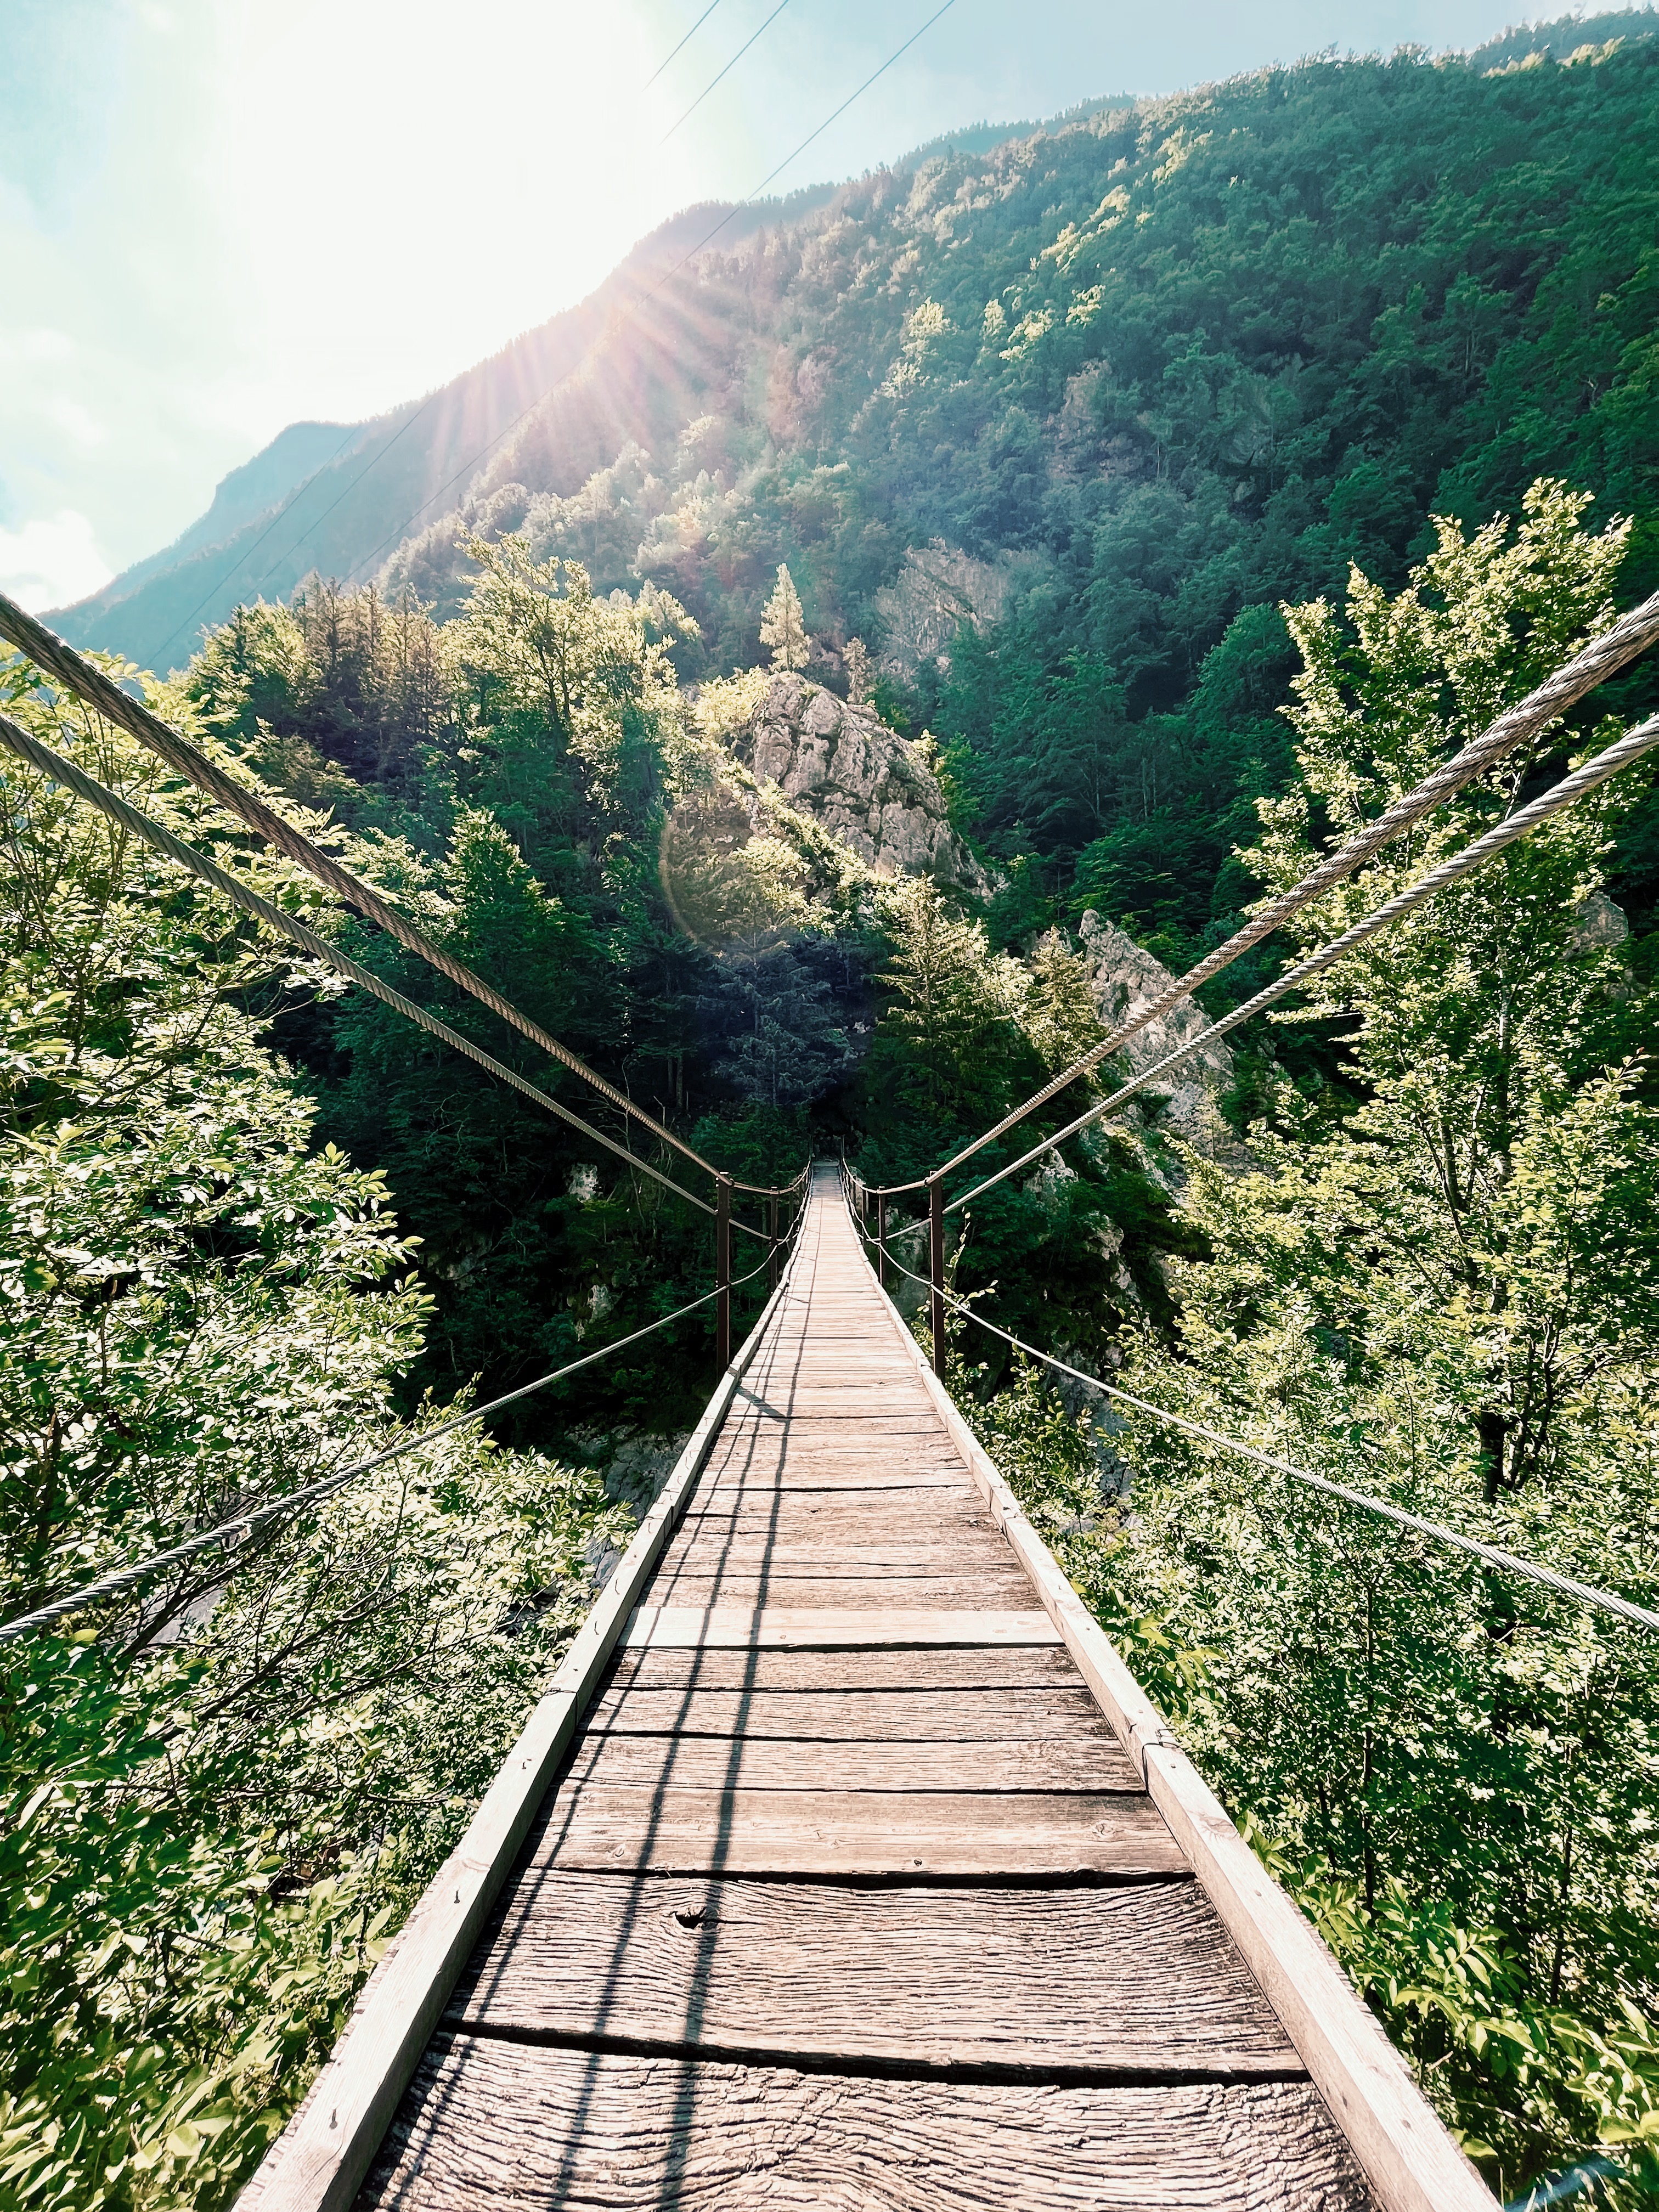 Bridge over Soca river on the Alpe Adria Trail, a long-distance hiking trail in Europe